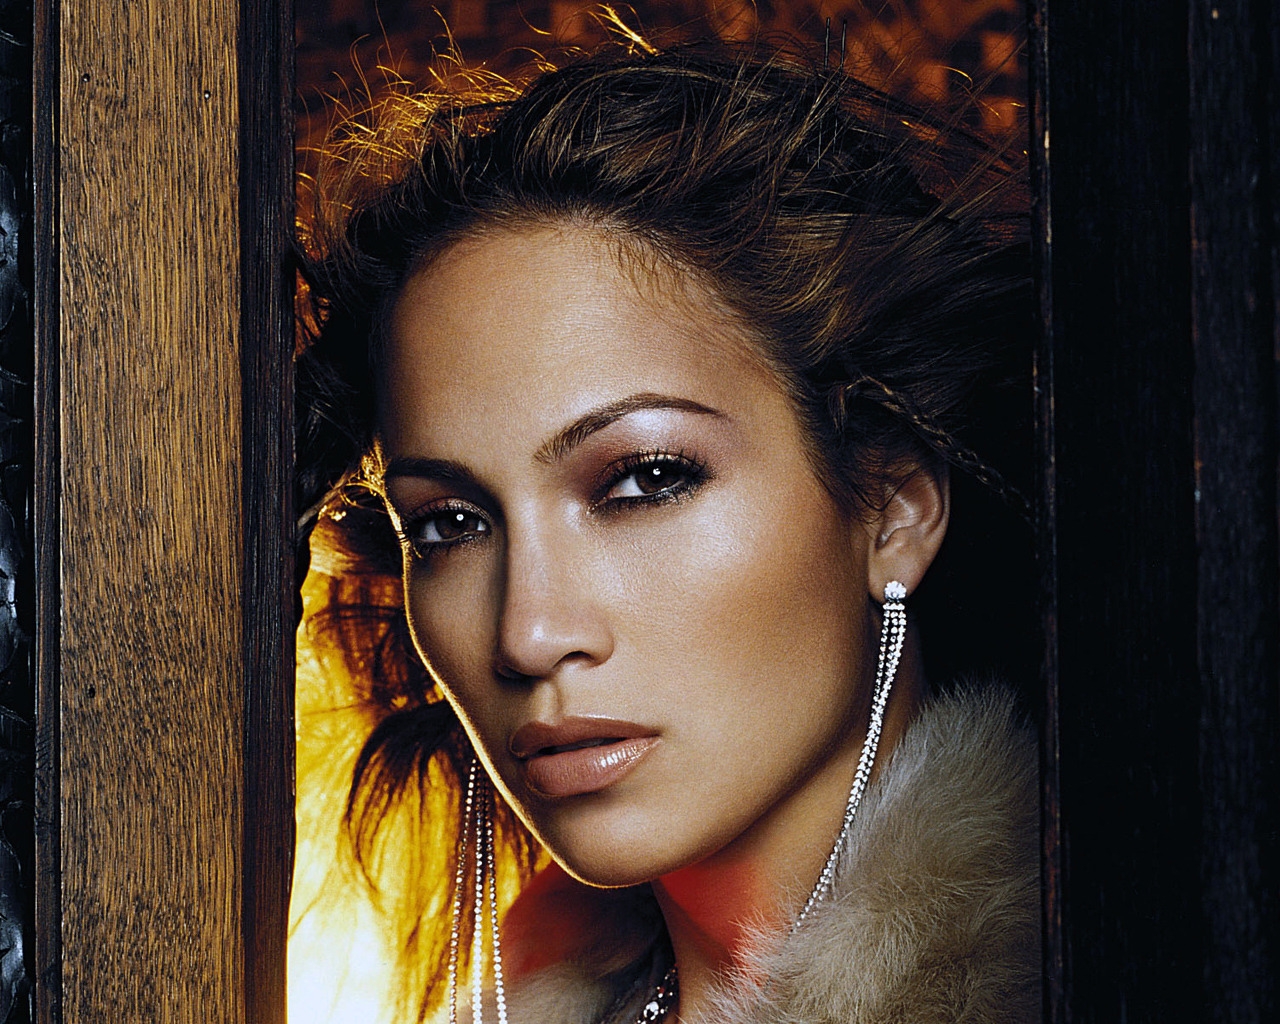 J.Lo for 1280 x 1024 resolution